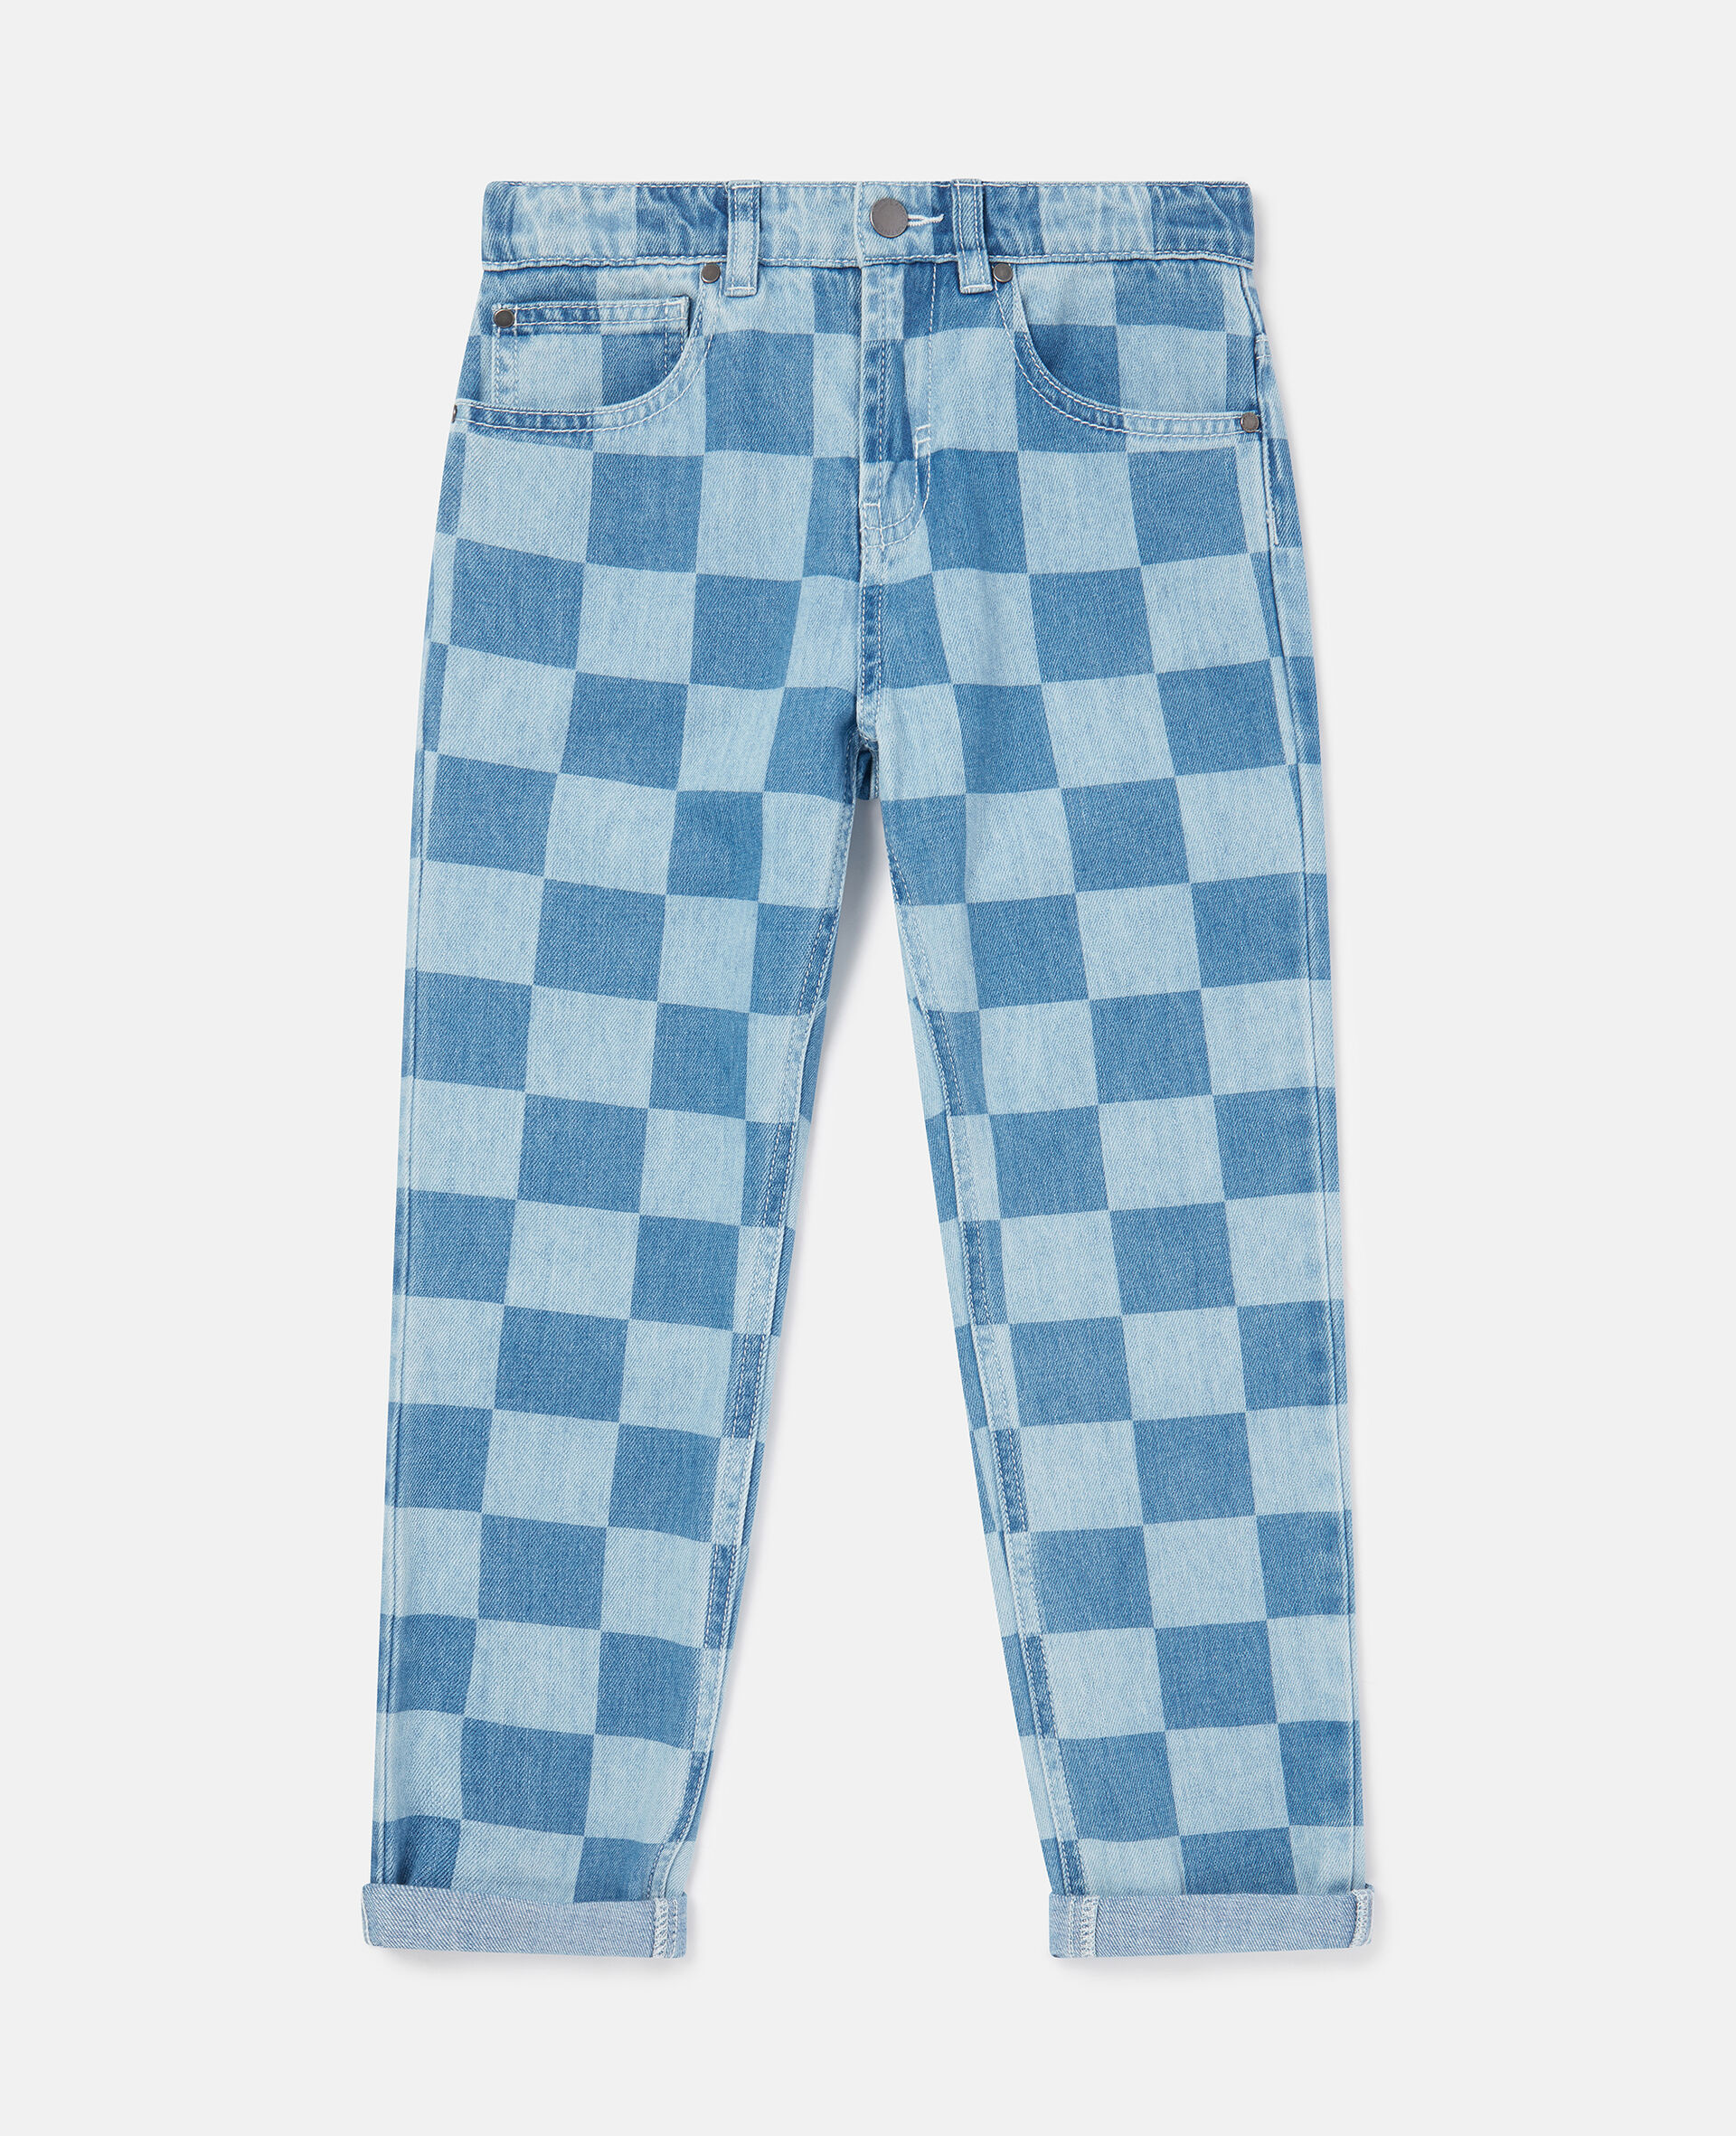 Checkerboard Print Jeans-Blue-large image number 0